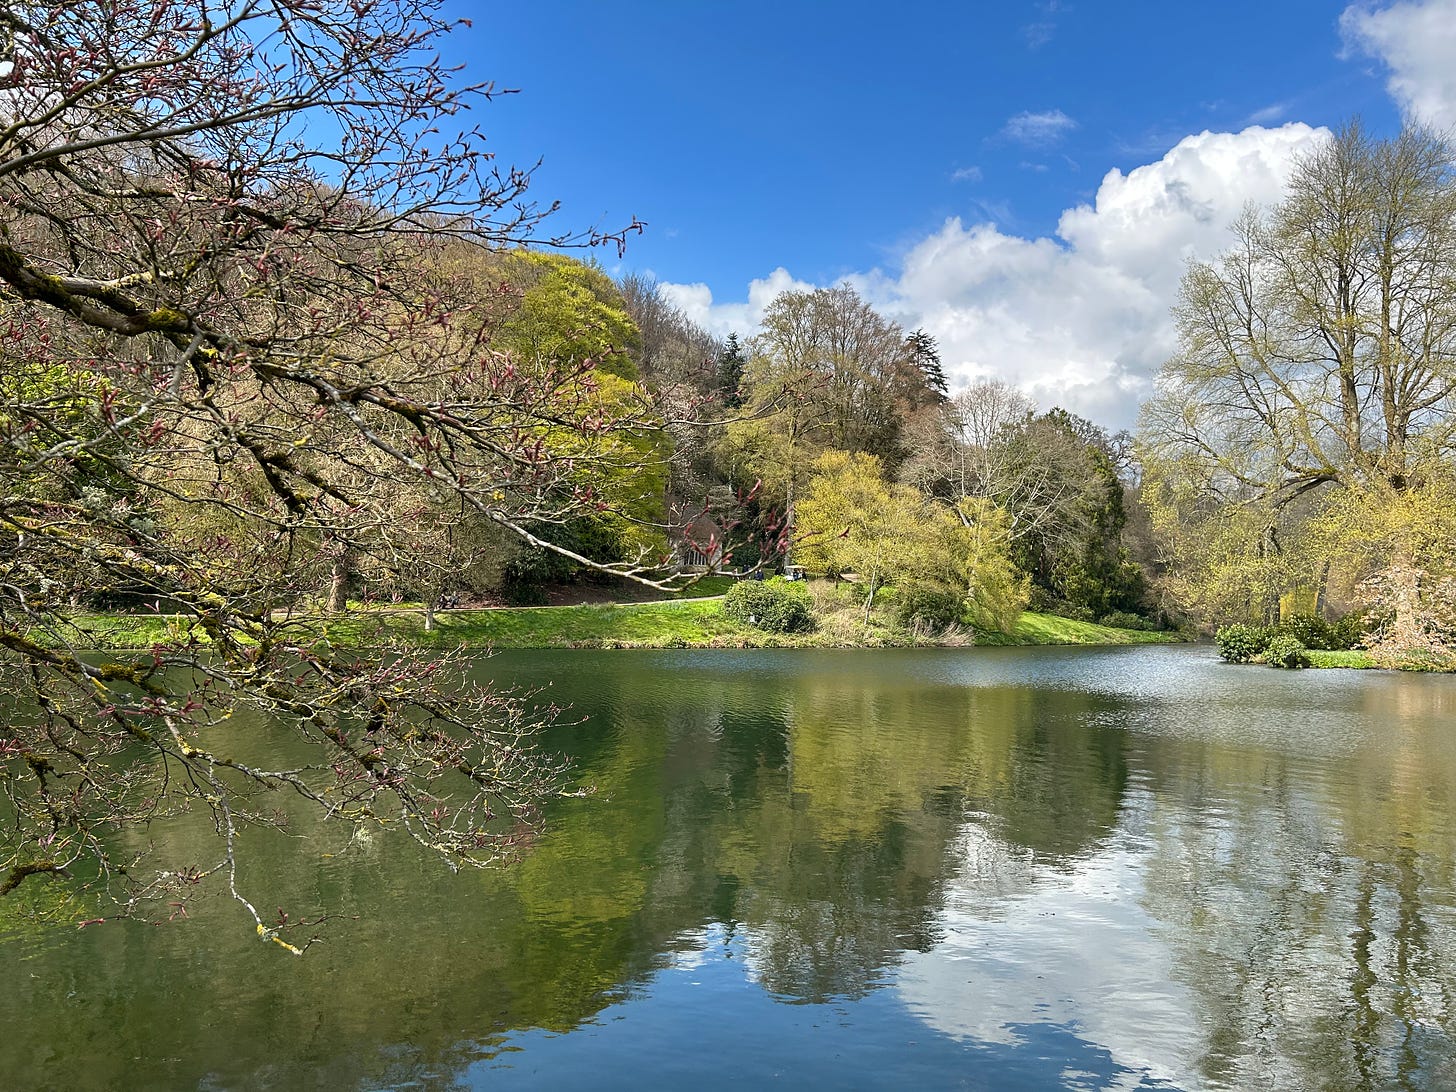 The lake, Stourhead Garden, Wiltshire - a National Trust Property.